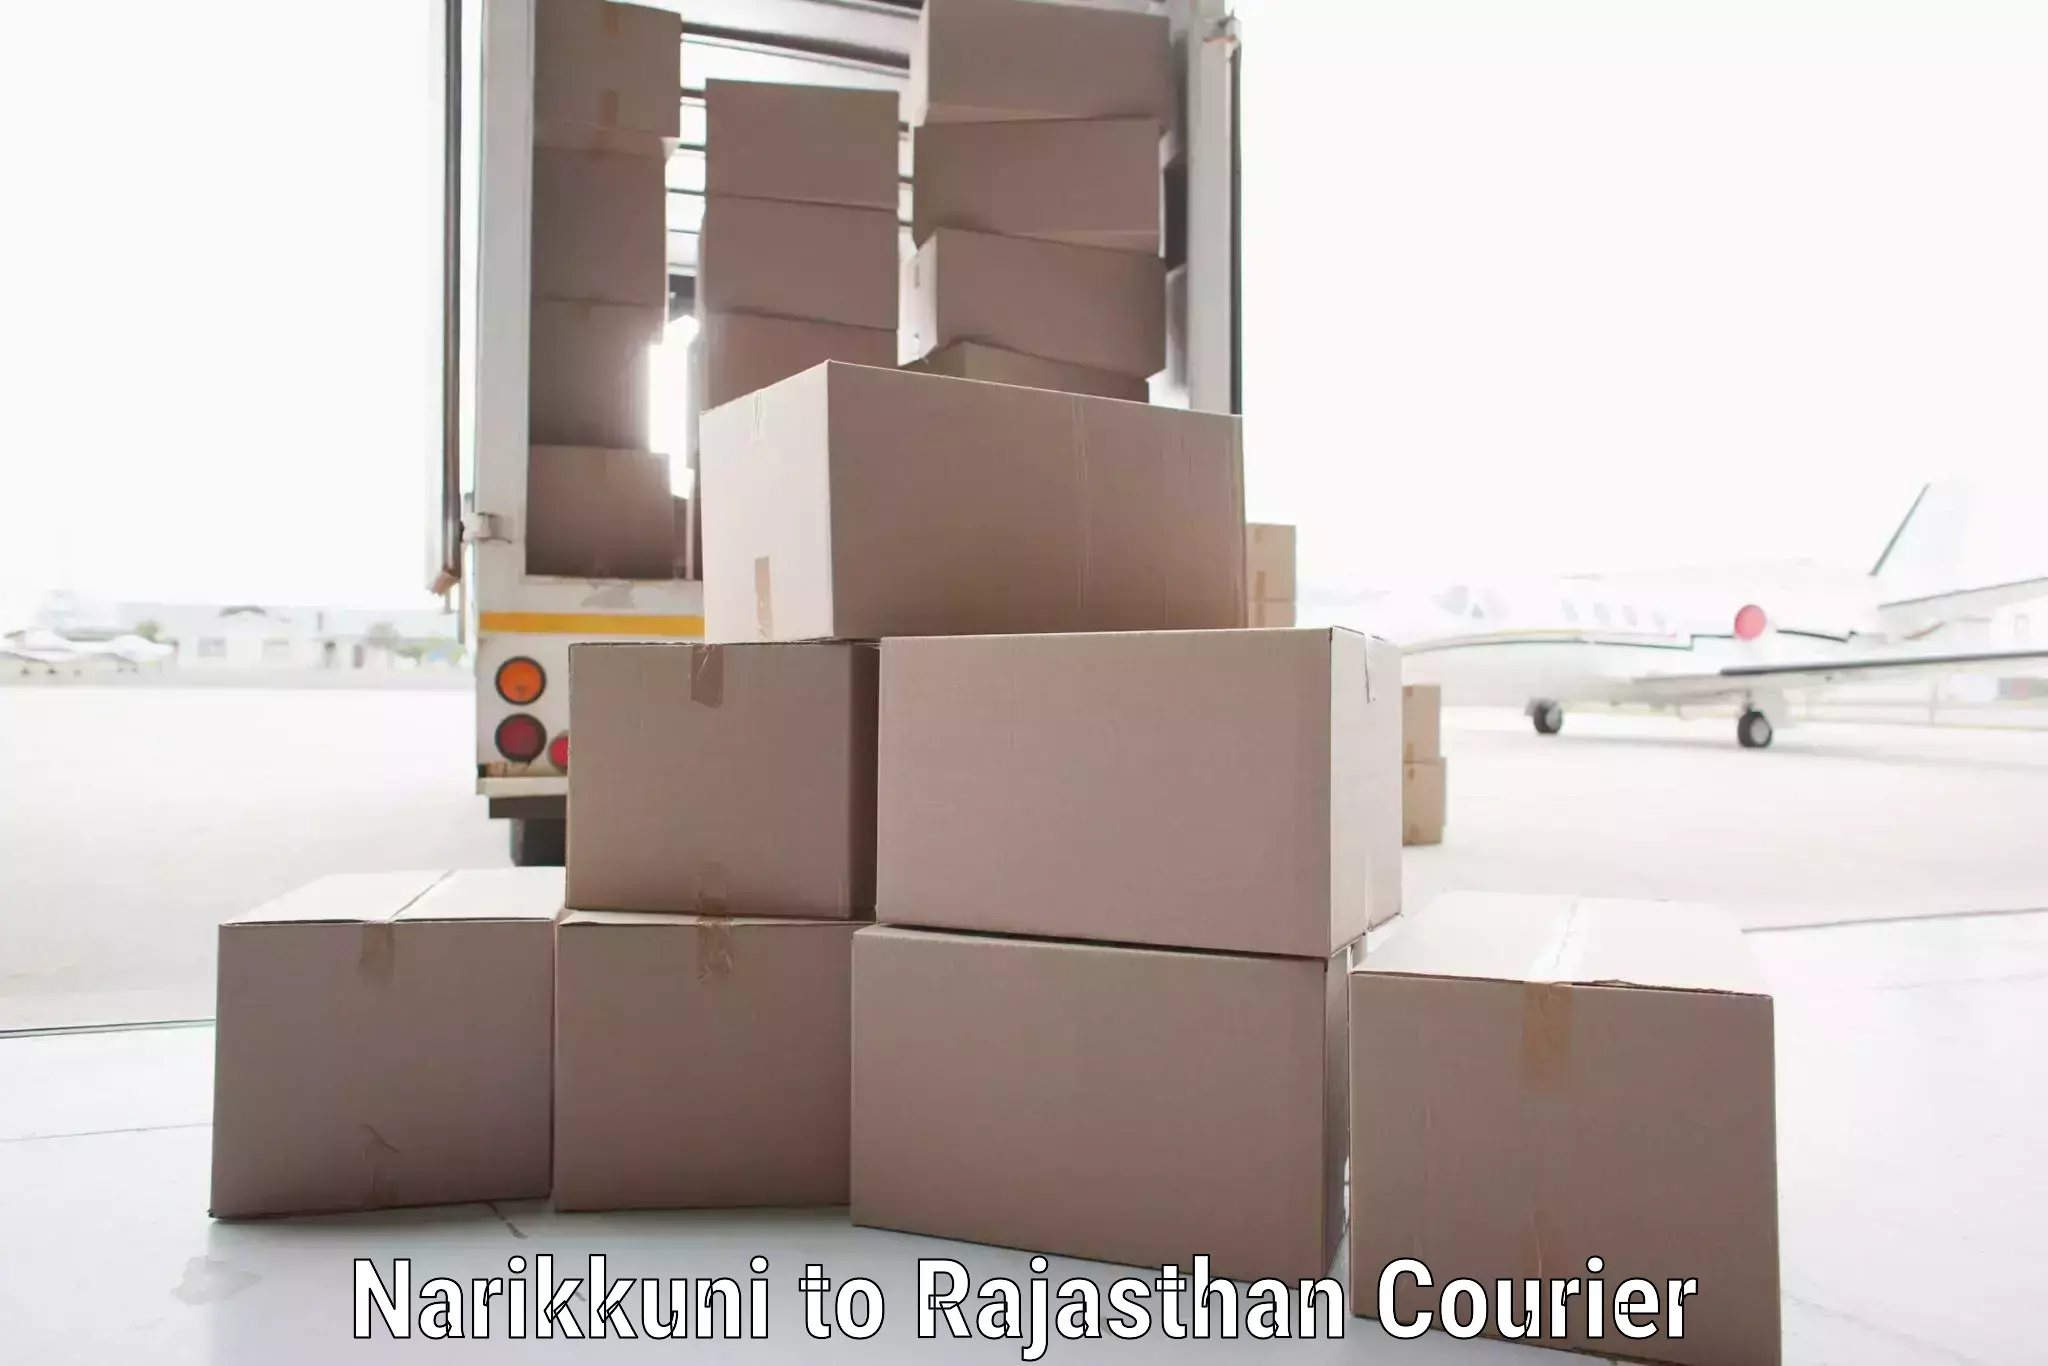 Air courier services in Narikkuni to Rajasthan